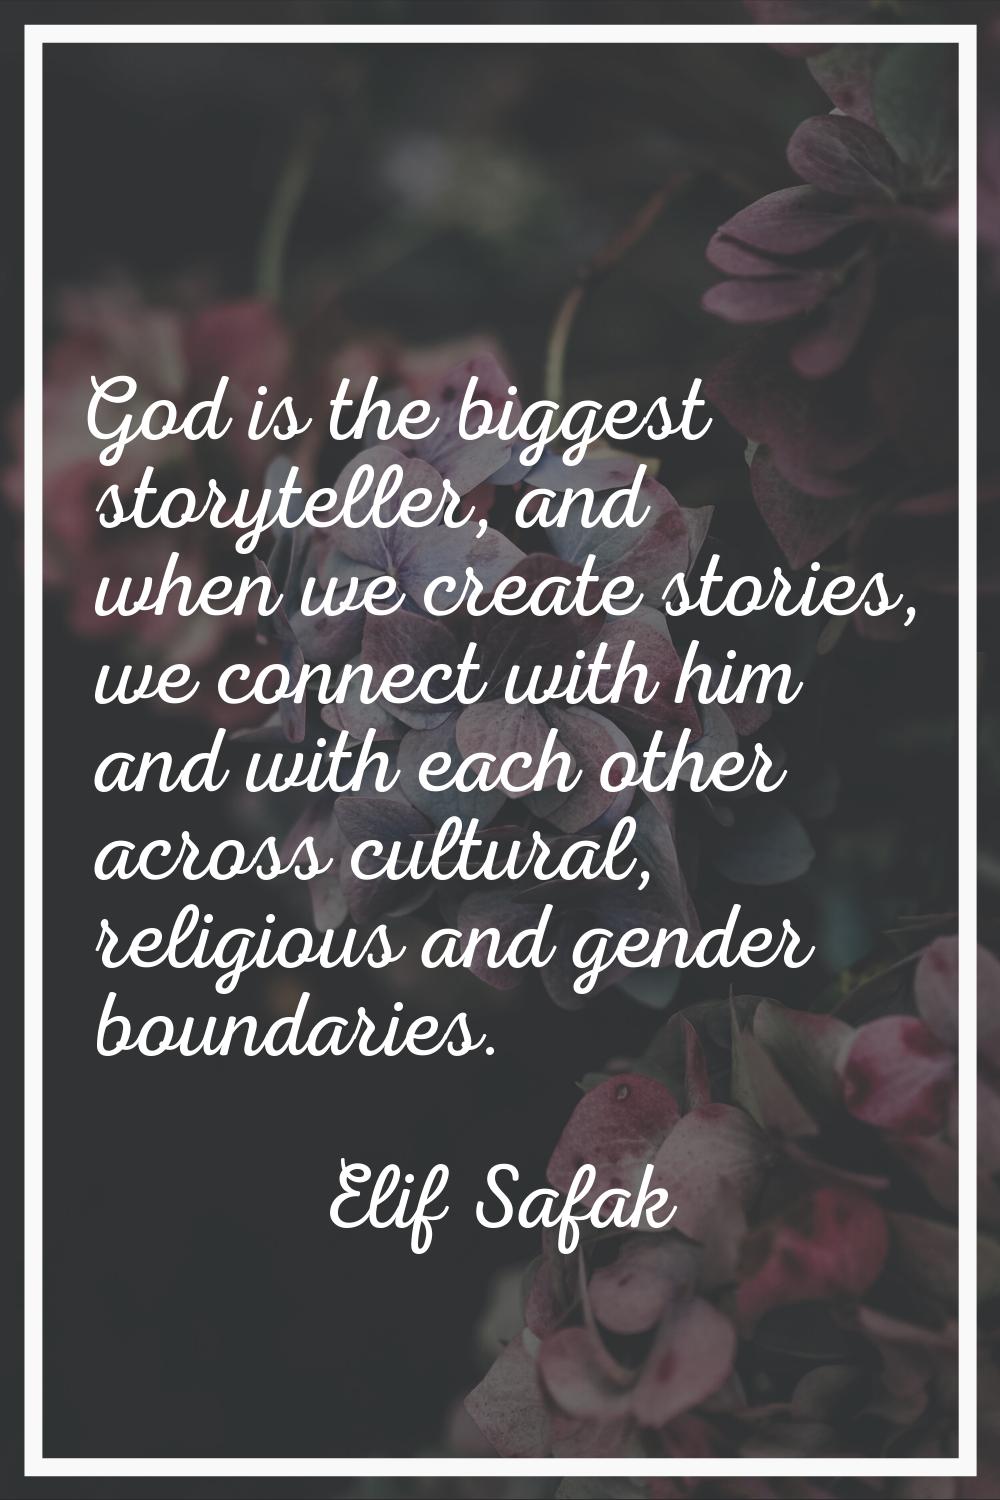 God is the biggest storyteller, and when we create stories, we connect with him and with each other